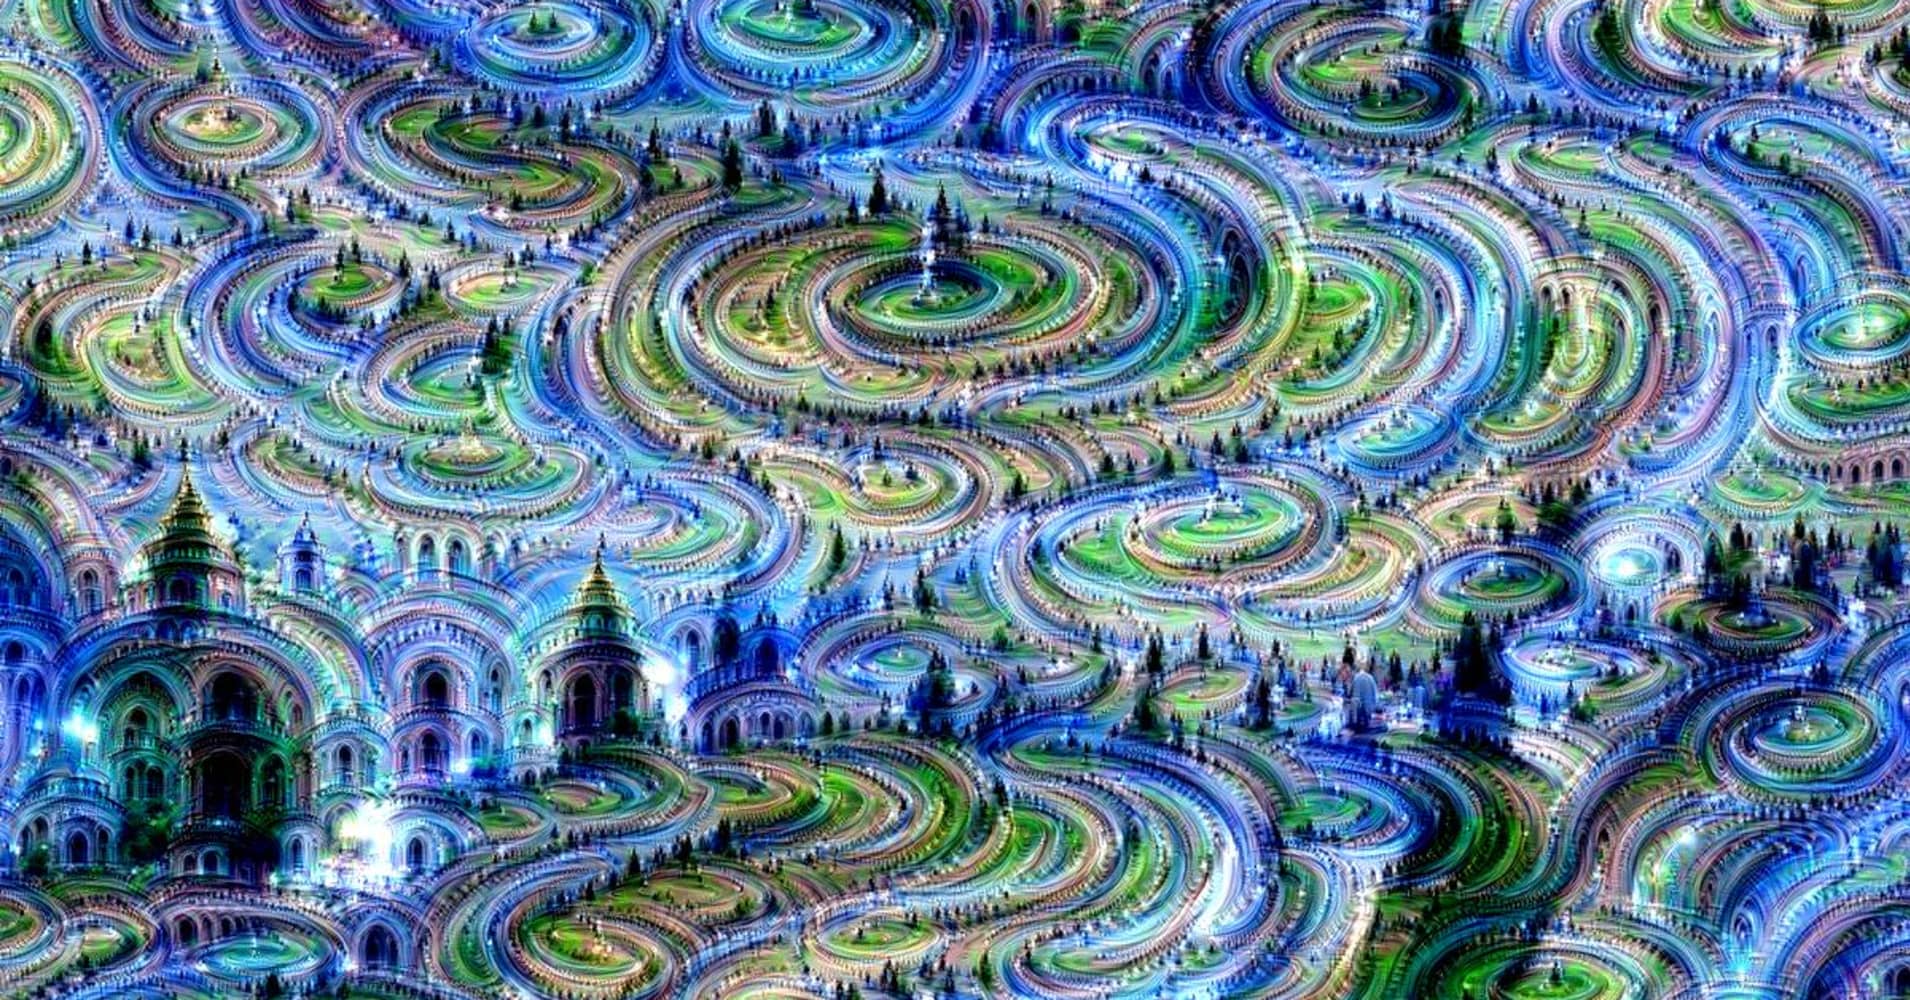 An image created using Magenta, inspired by Google DeepDream.